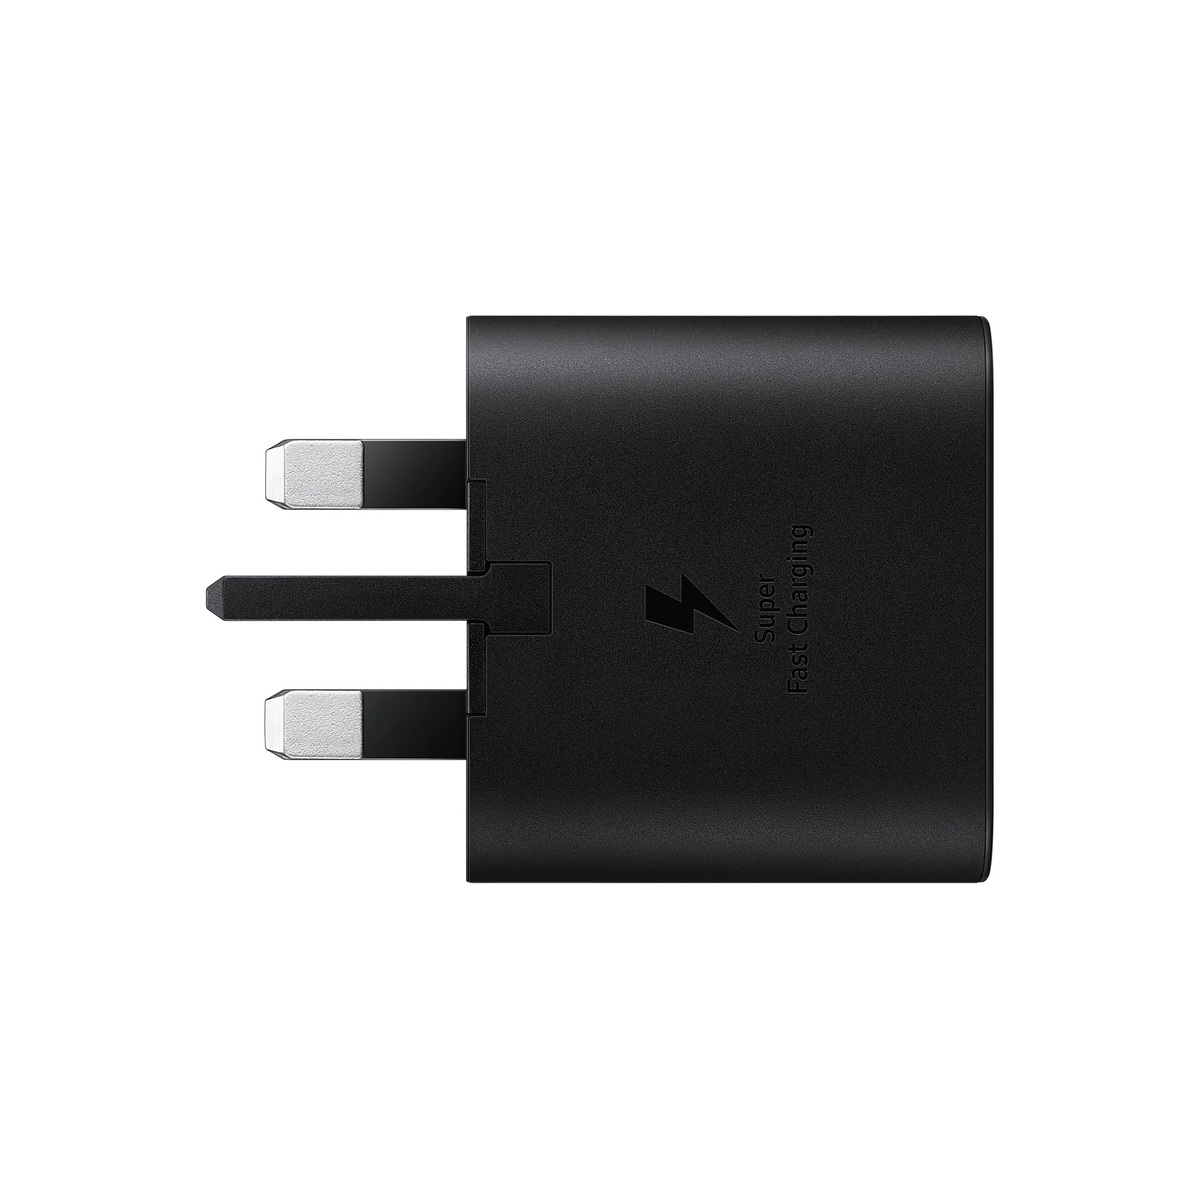 Samsung 25W Travel Adapter (Super Fast Charging without USB Cable